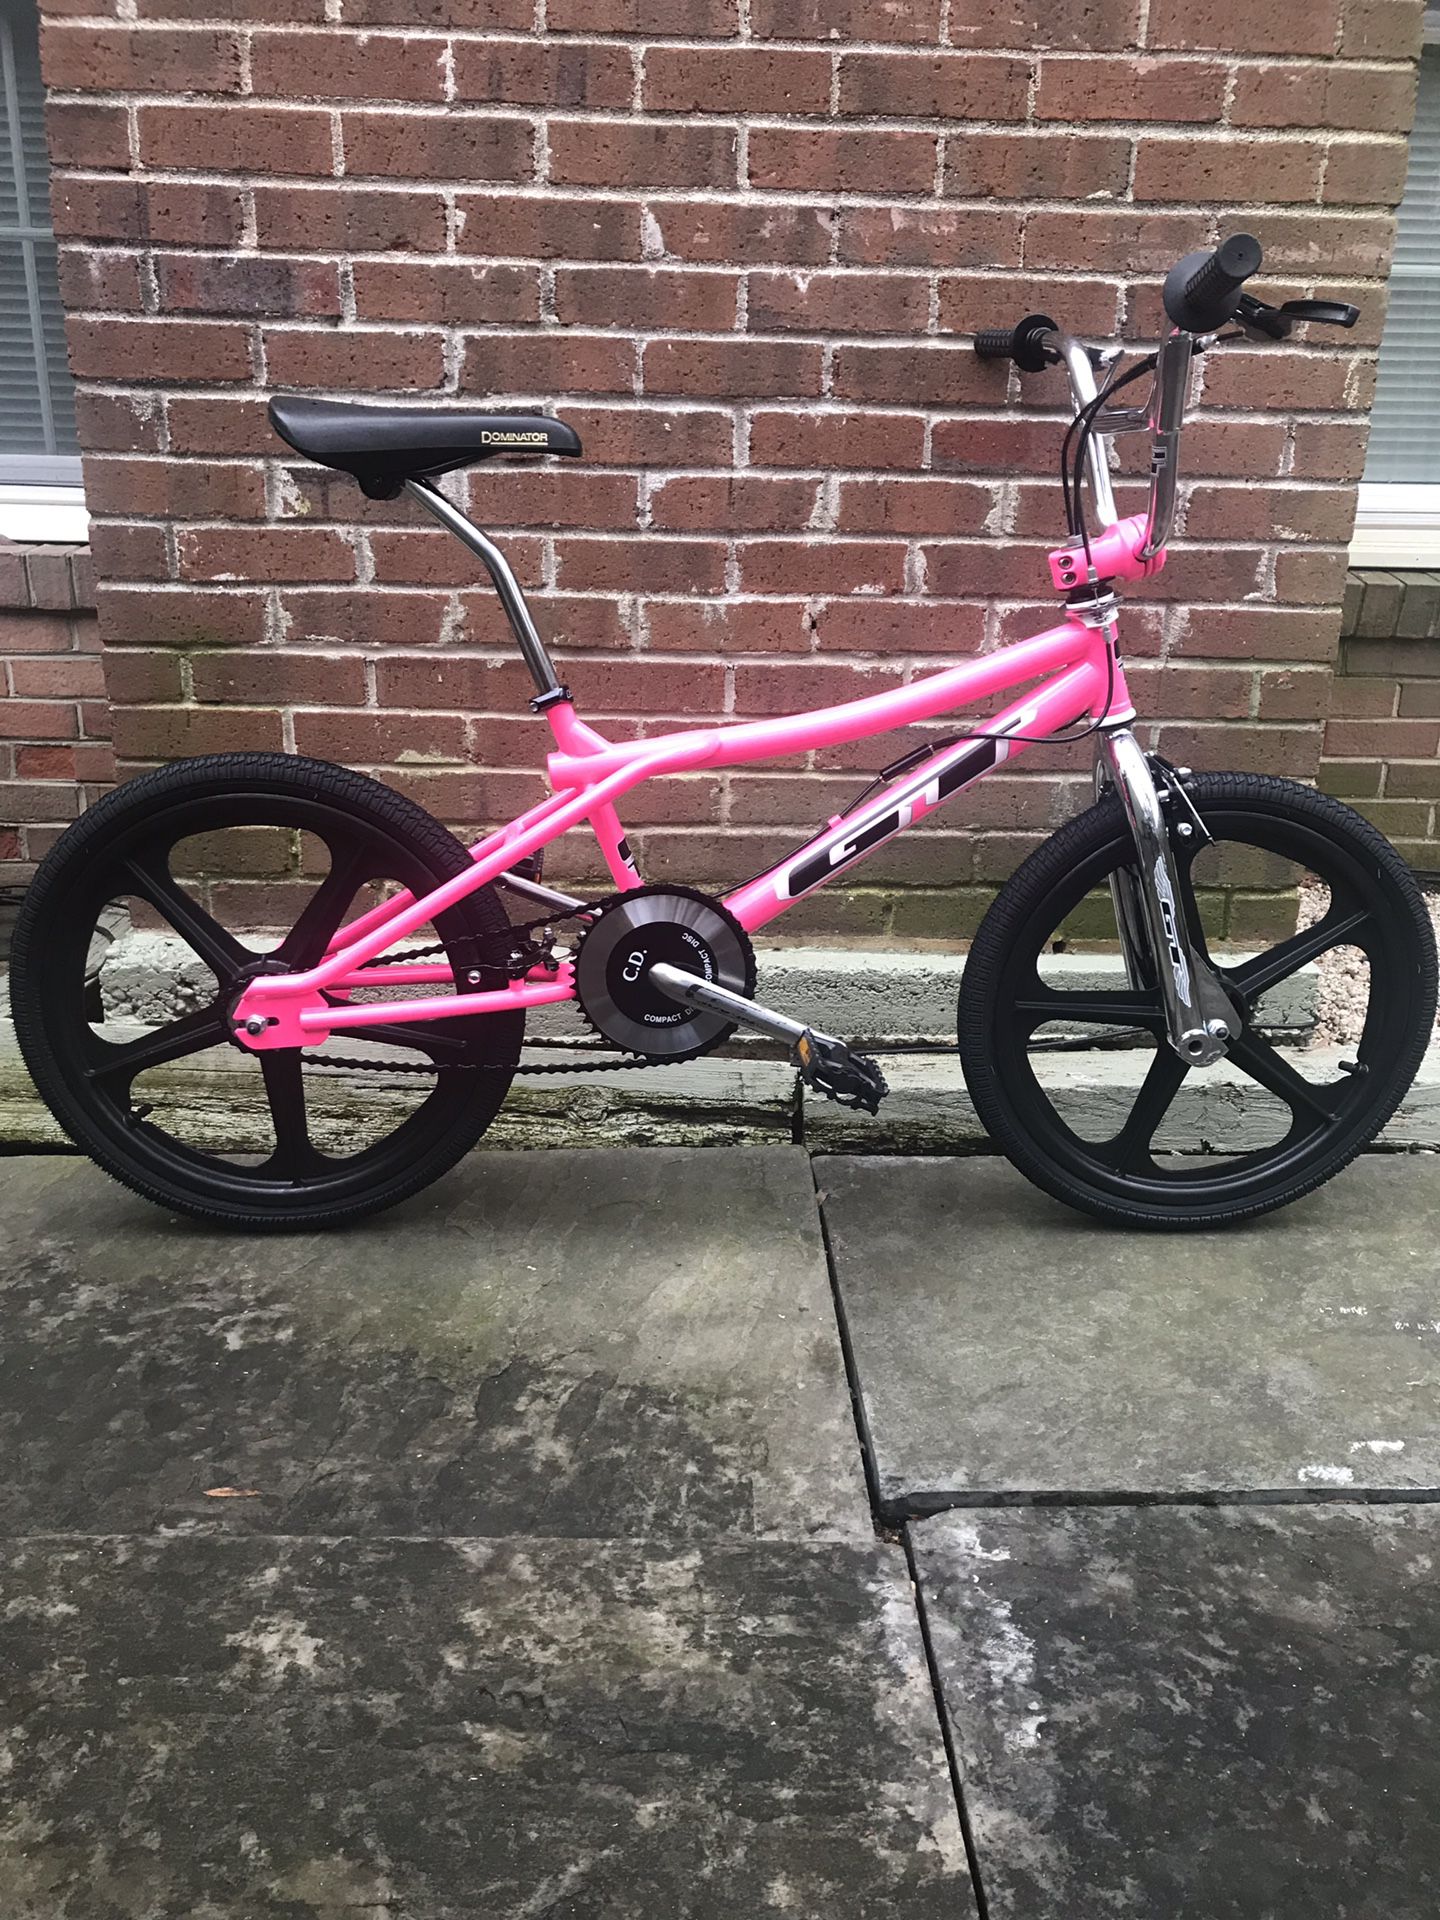 GT PRO PERFORMER [PINK] Completely Refurbished: 80’s STYLE FREESTYLE BMX BIKE!